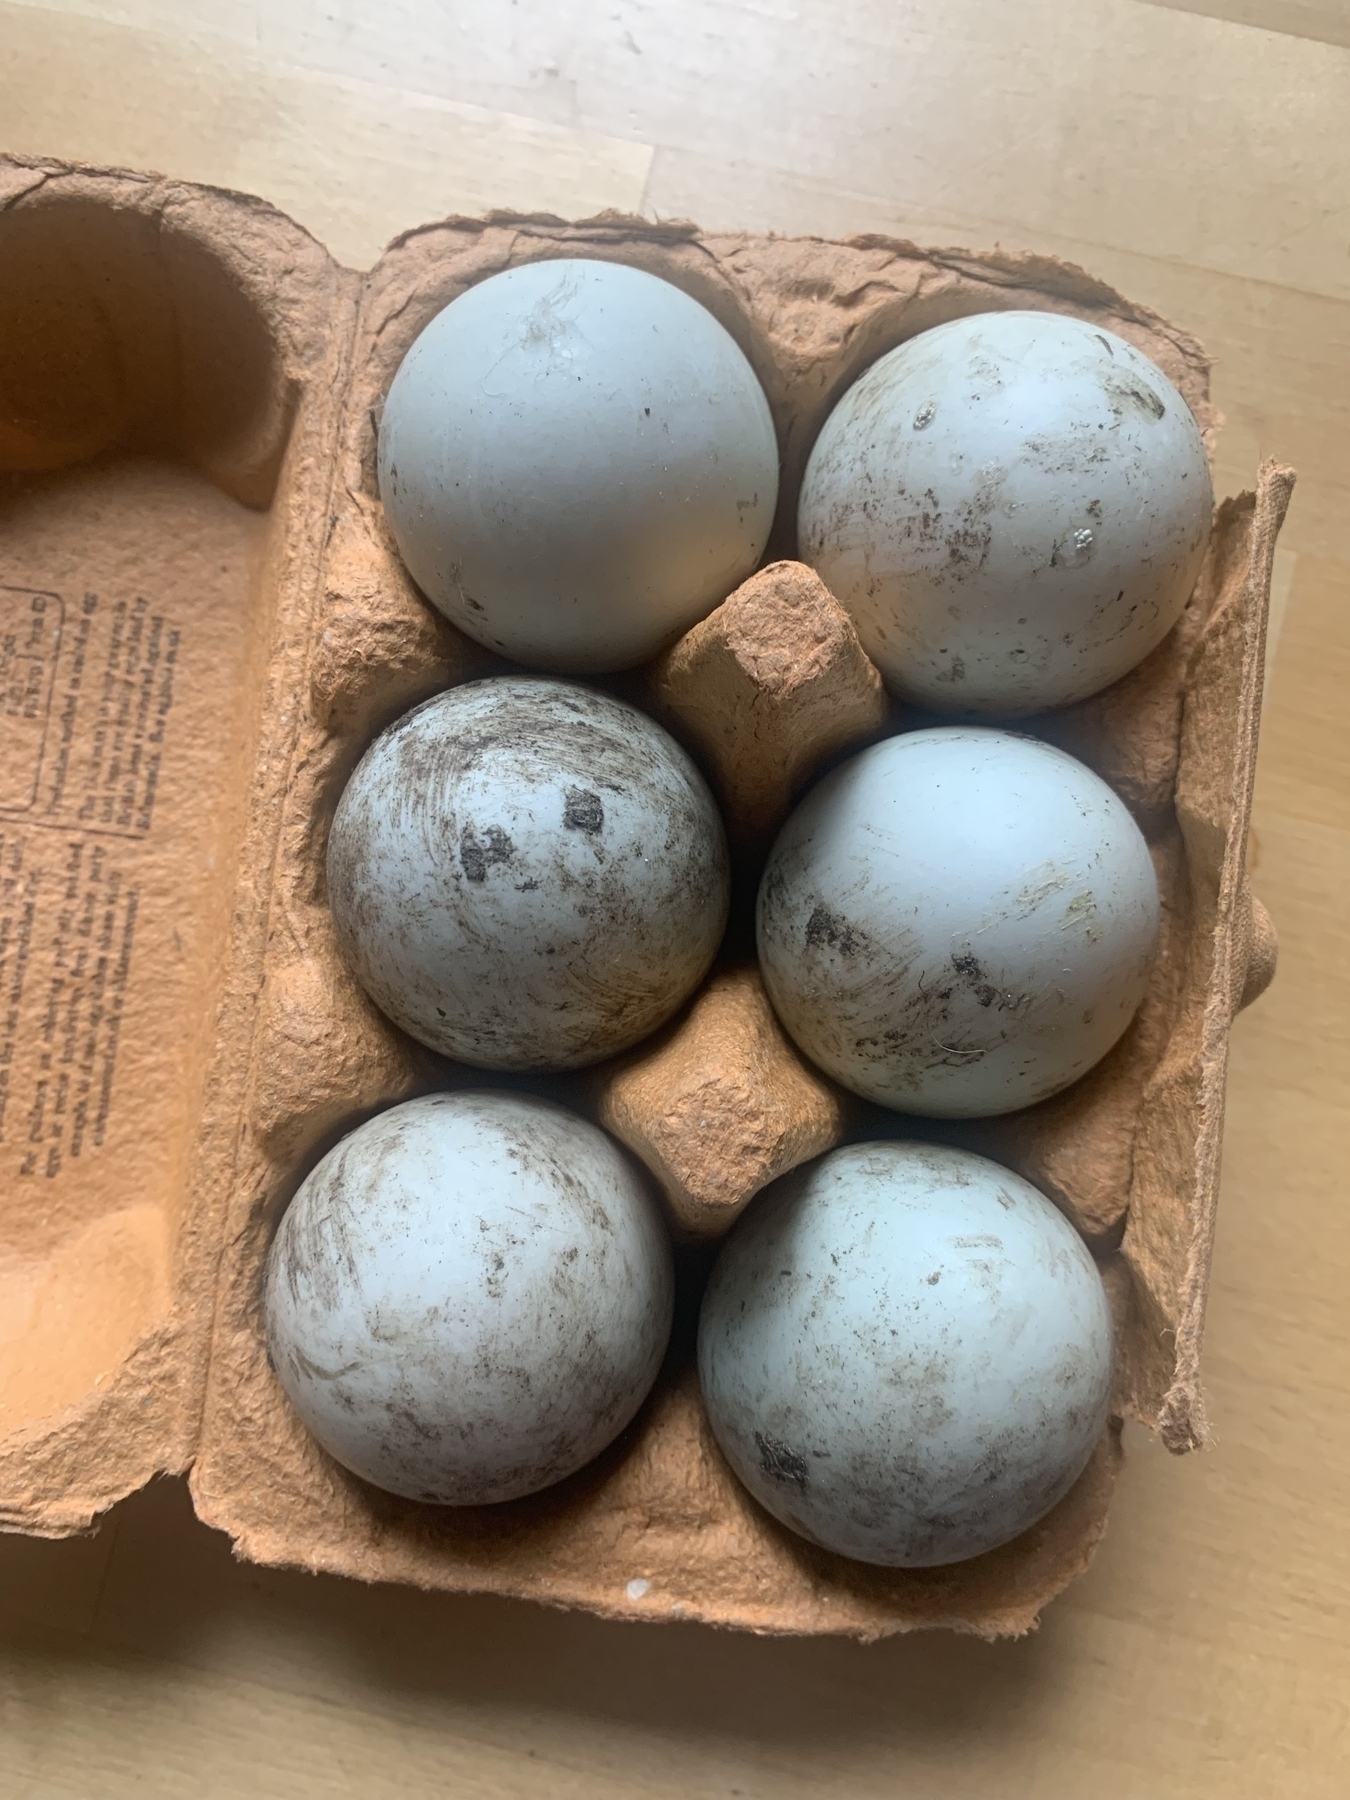 Open egg box holding six large duck eggs covered in dirt.